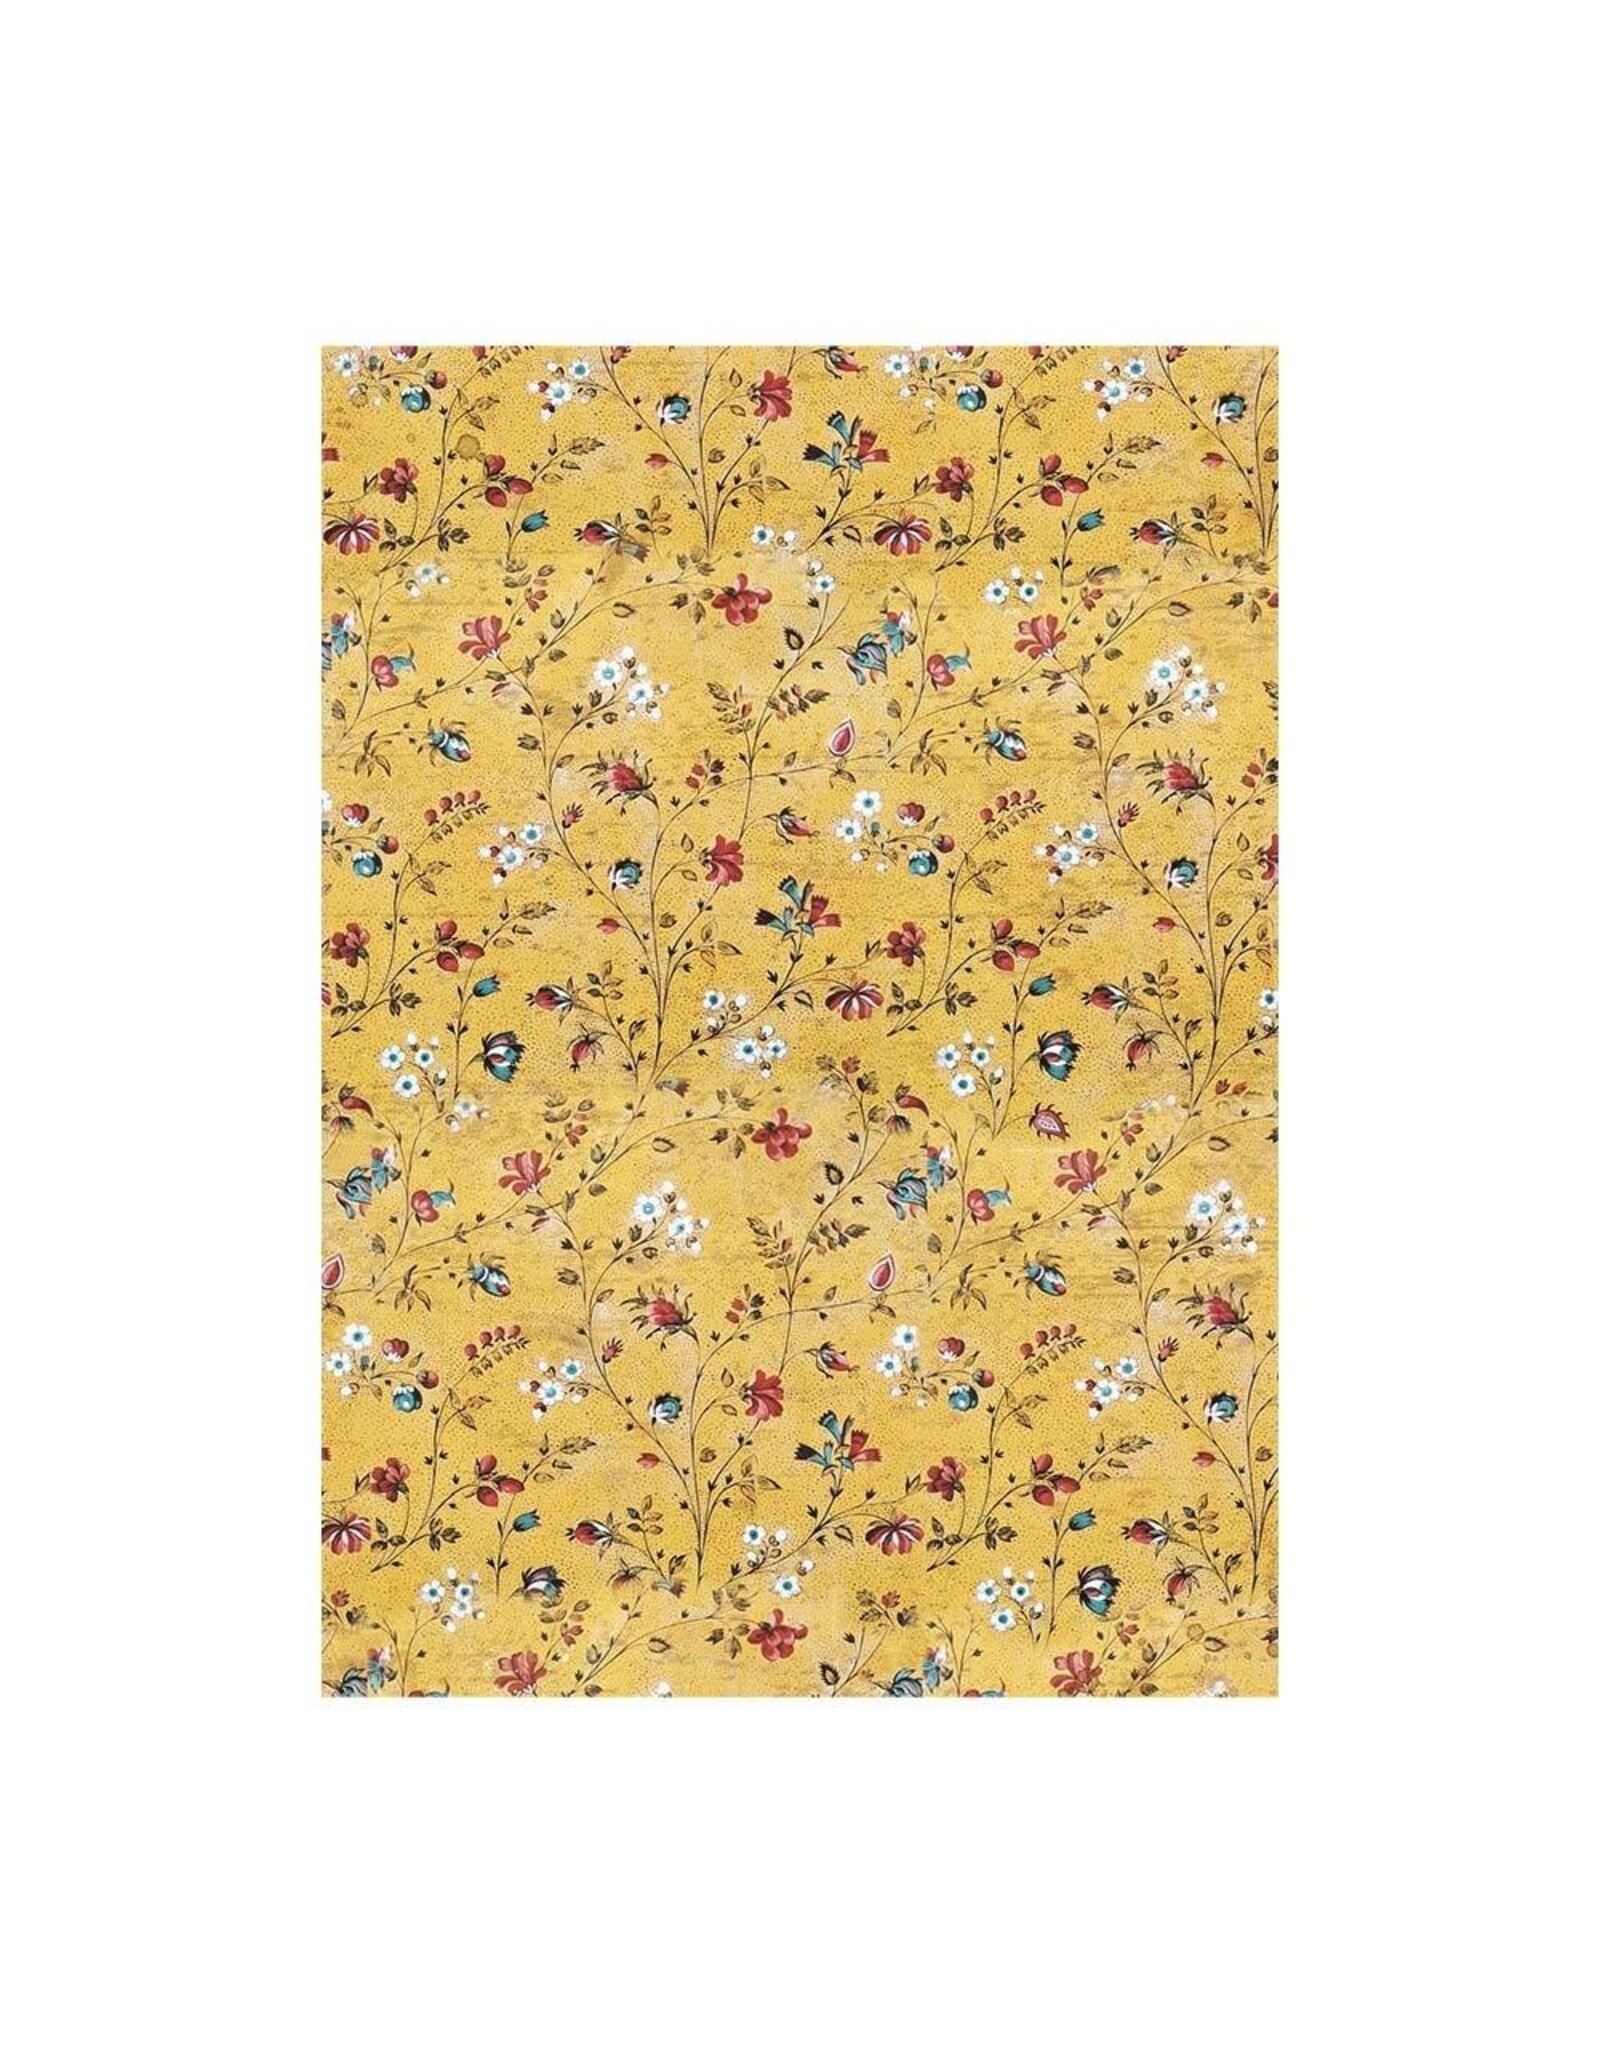 Stamperia Sunflower Art - Assorted Rice Paper Backgrounds A6 8/Sheets